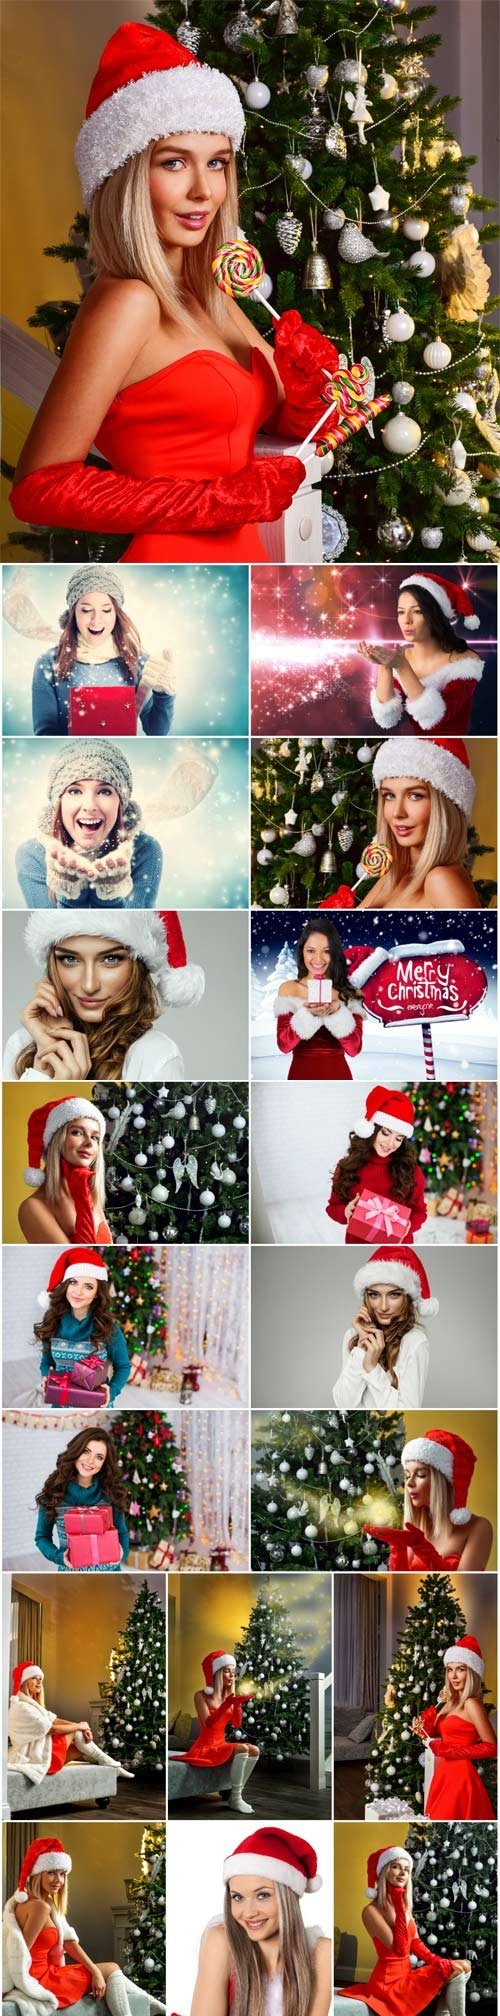 New Year and Christmas stock photos - 61